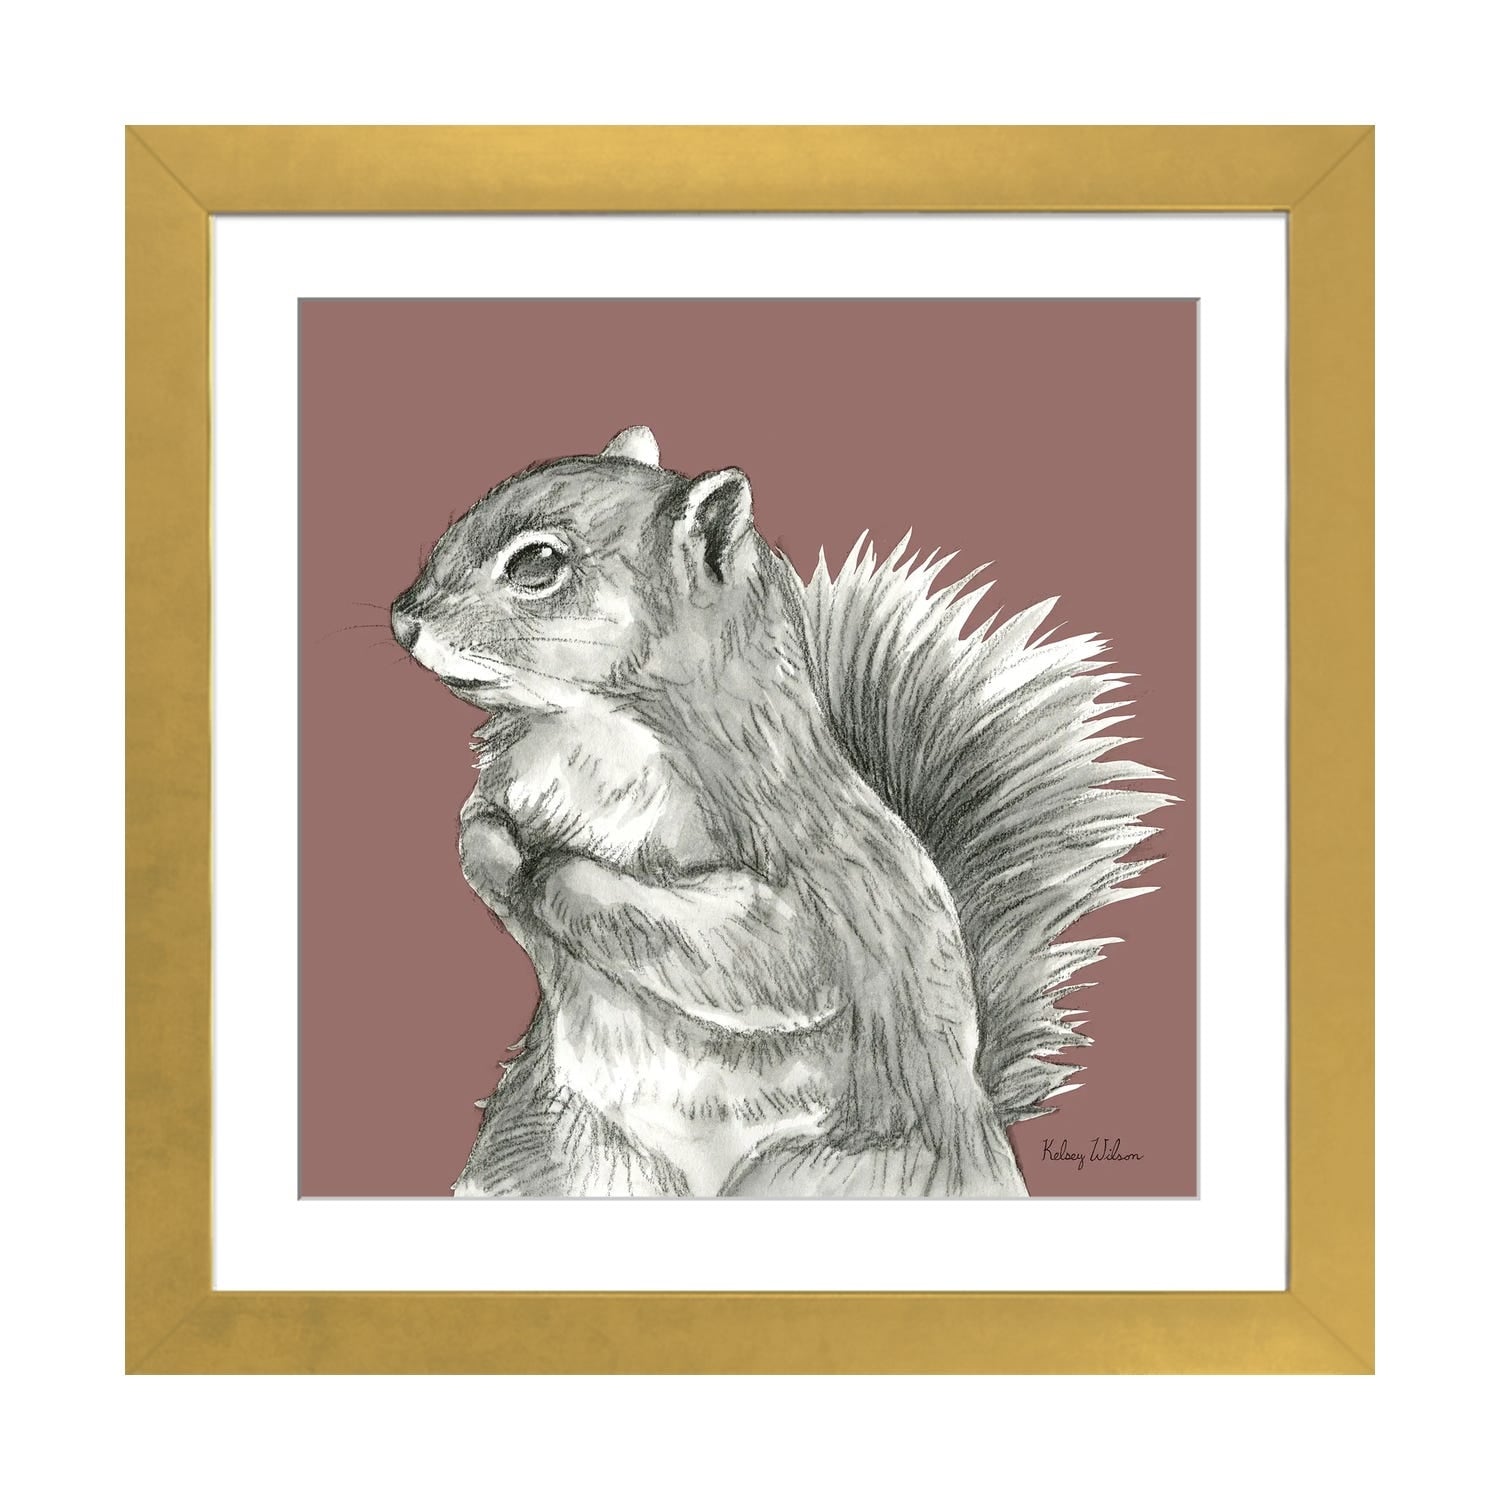 https://ak1.ostkcdn.com/images/products/is/images/direct/98b081fedae8660e076eabfbd2285545bd21c015/iCanvas-%22Watercolor-Pencil-Forest-Color-IV-Squirrel%22-by-Kelsey-Wilson.jpg